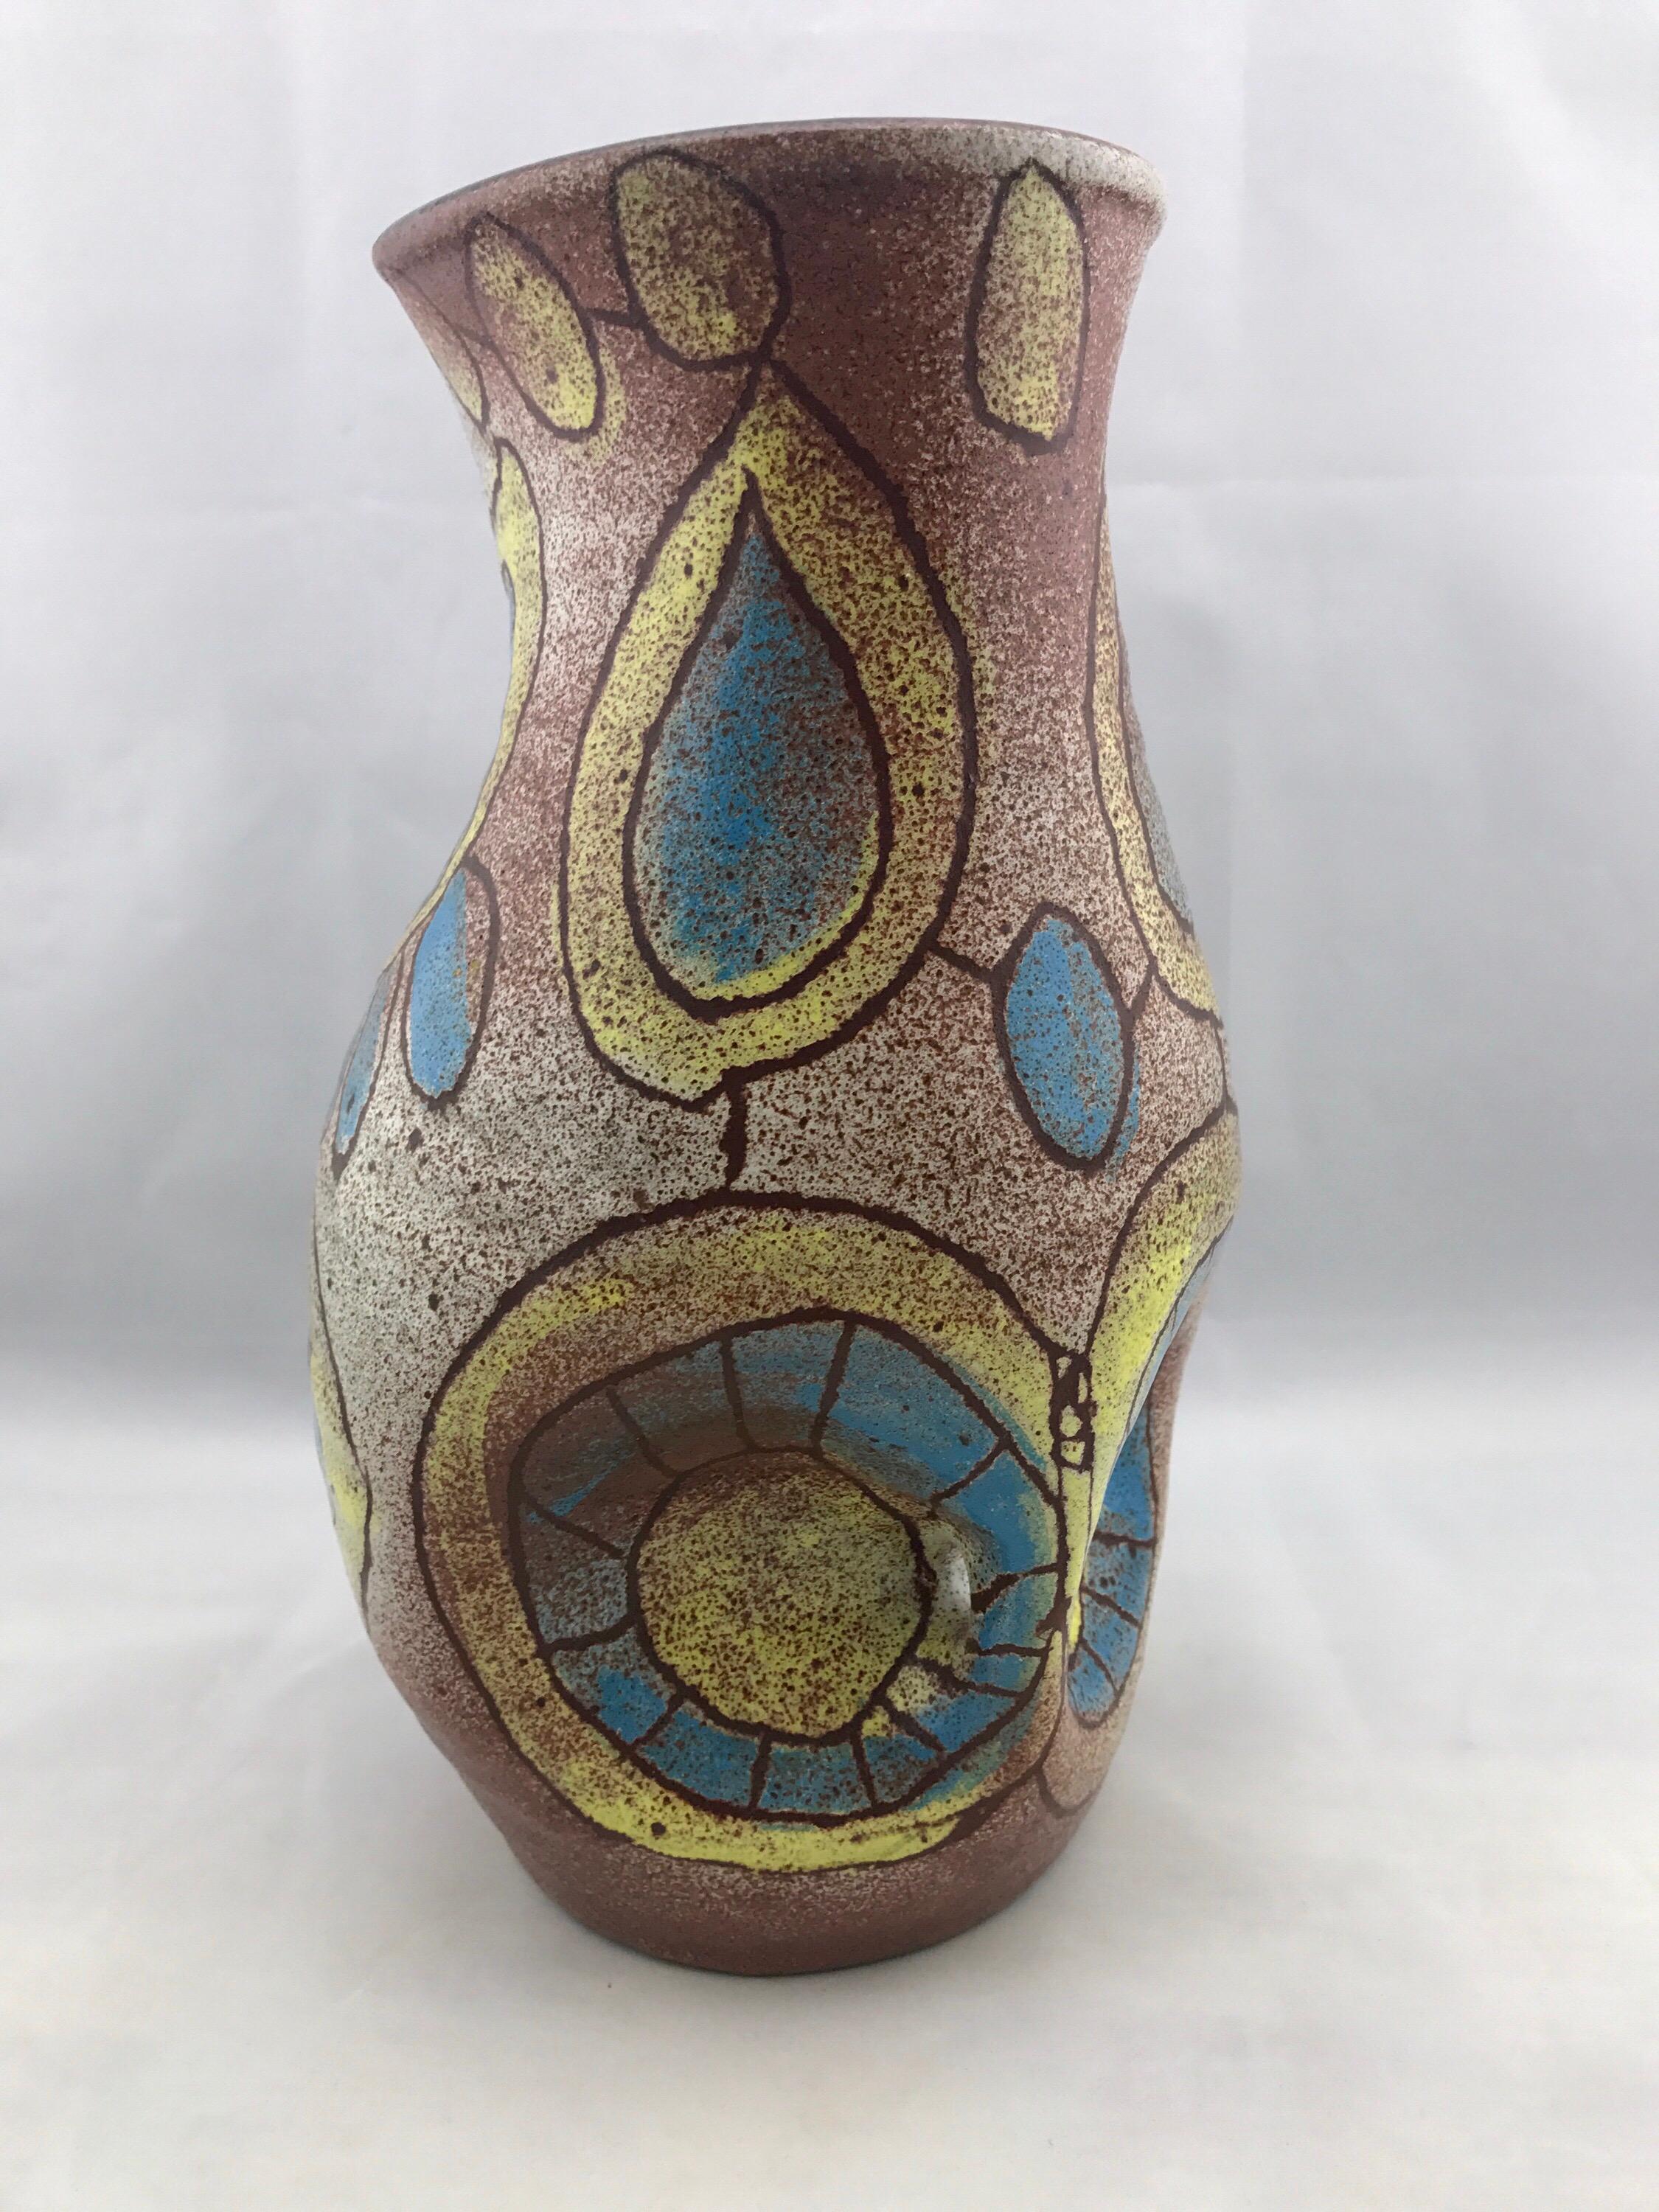 Mid-Century Modern French vase by Accolay, vintage blue and yellow modernist owl.
No know issues that would detract from value or aesthetics. Clean and ready for use.